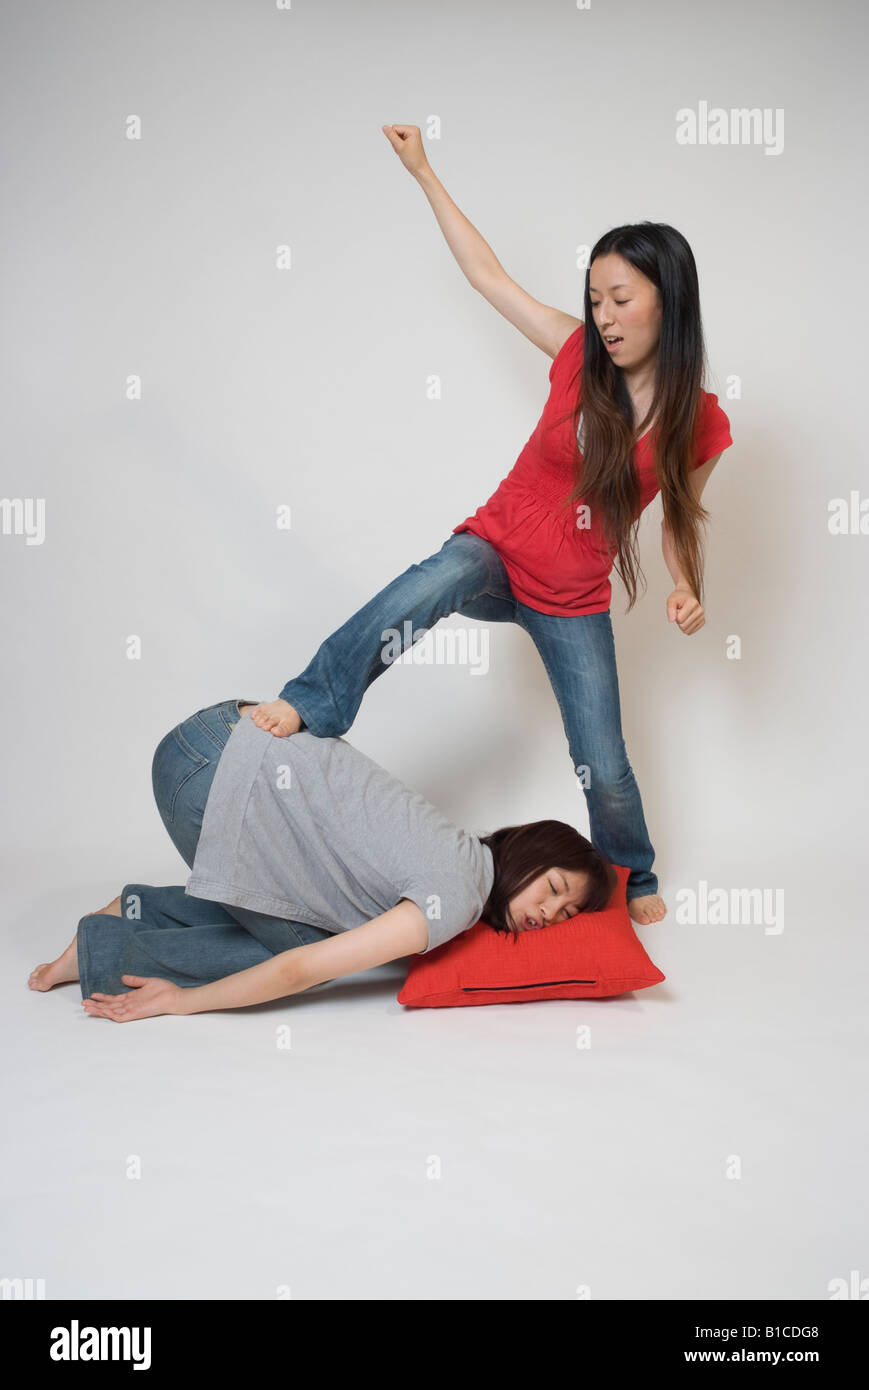 Young woman bullying another woman Stock Photo